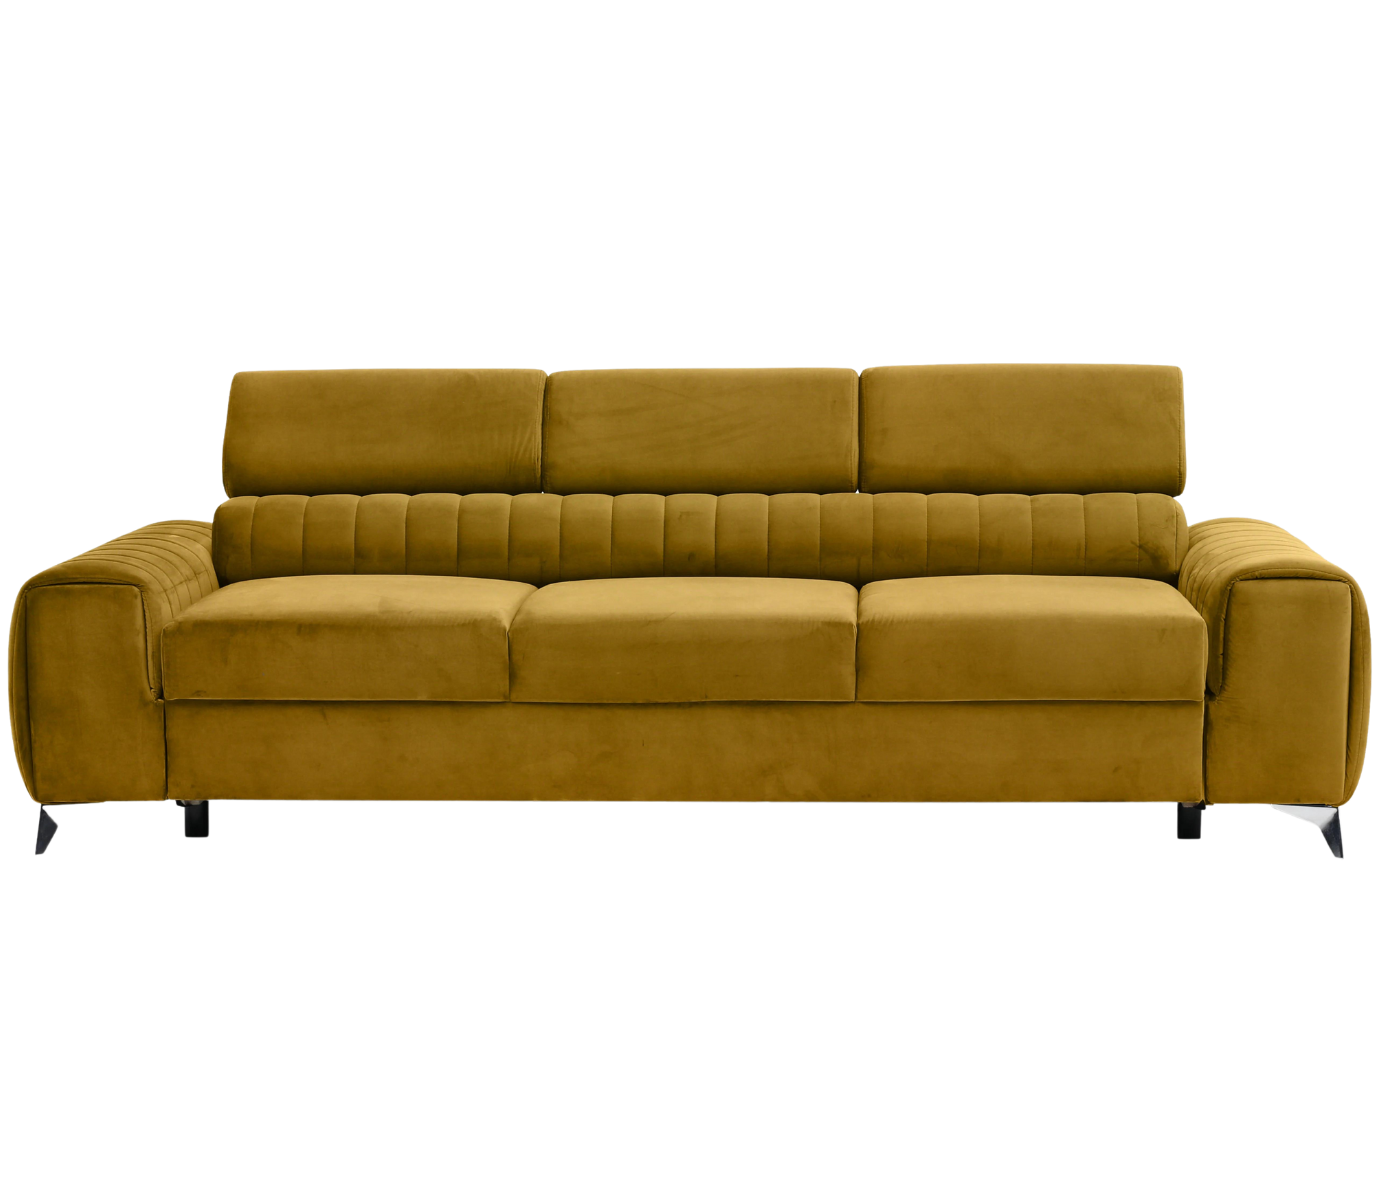 Sofa bed with reclining headrests - LAURENCE